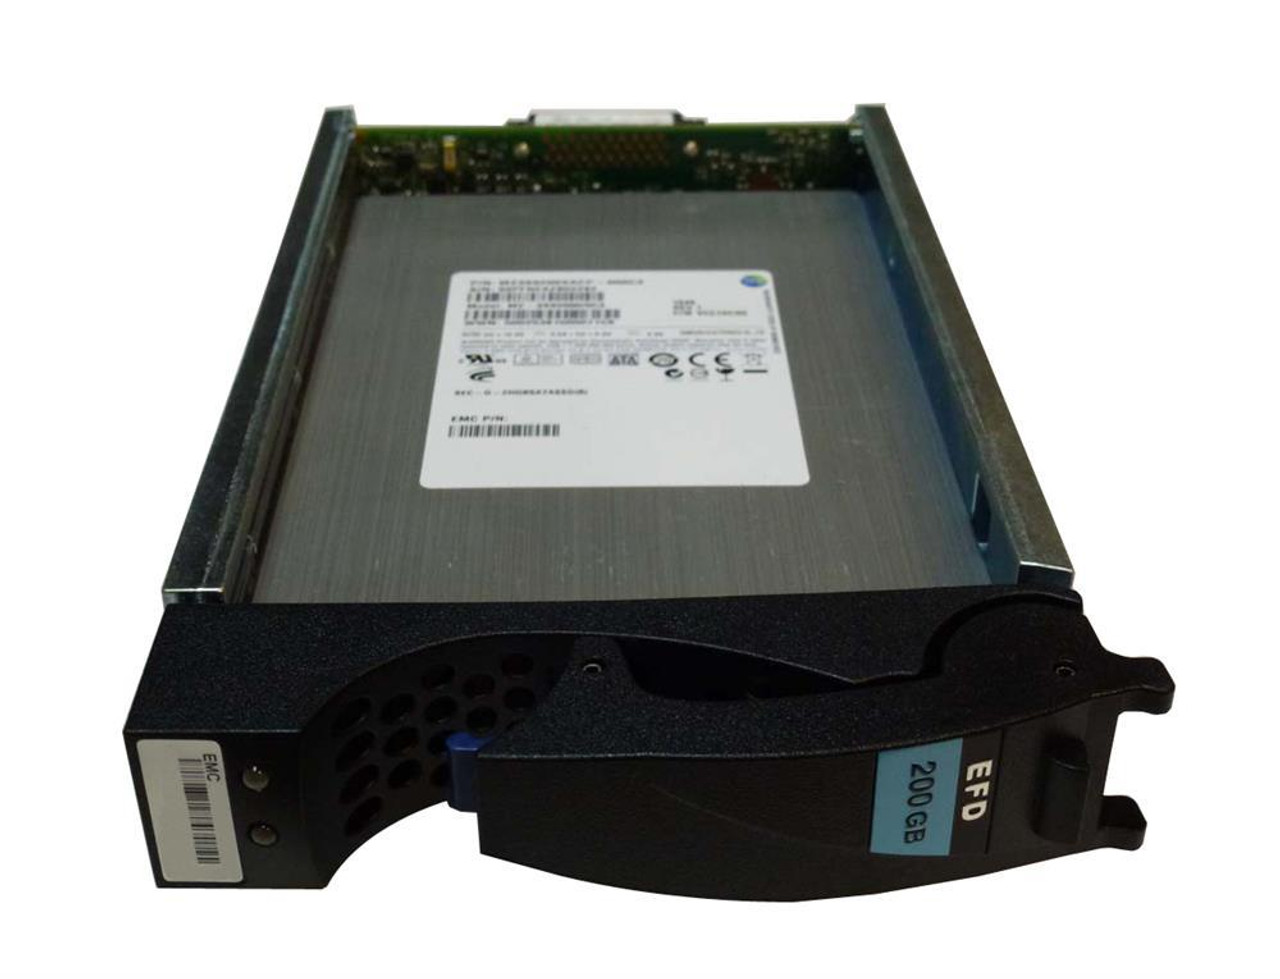 EMC 200GB SAS 6Gbps EFD 3.5-inch Internal Solid State Drive (SSD) with Tray for VNX5200 5400 5600 5800 7600 8000 Storage Systems